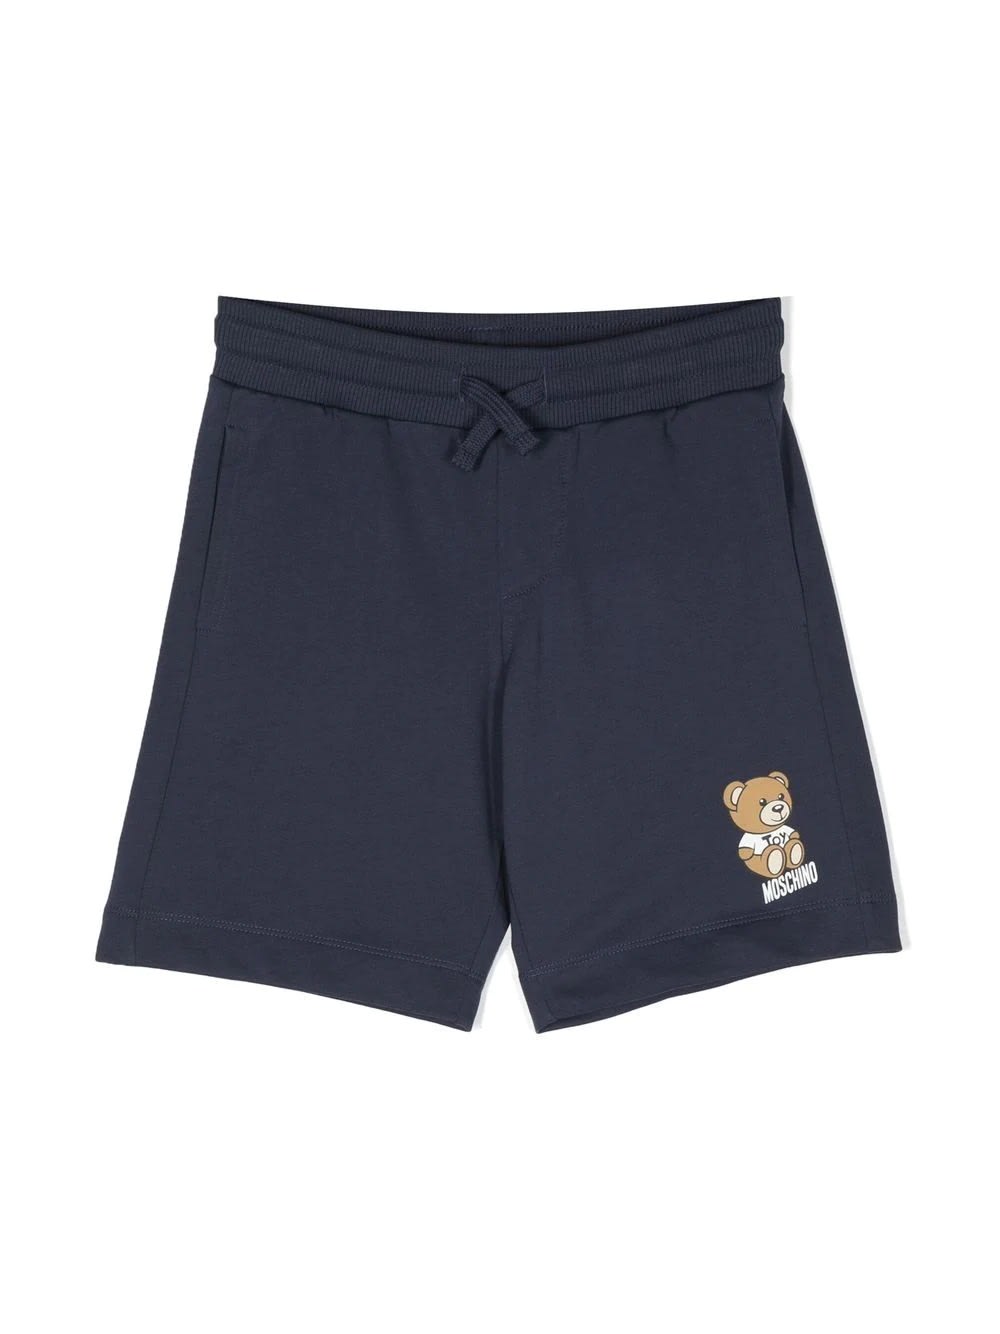 MOSCHINO NAVY BLUE SPORTY SHORTS WITH MOSCHINO TEDDY BEAR